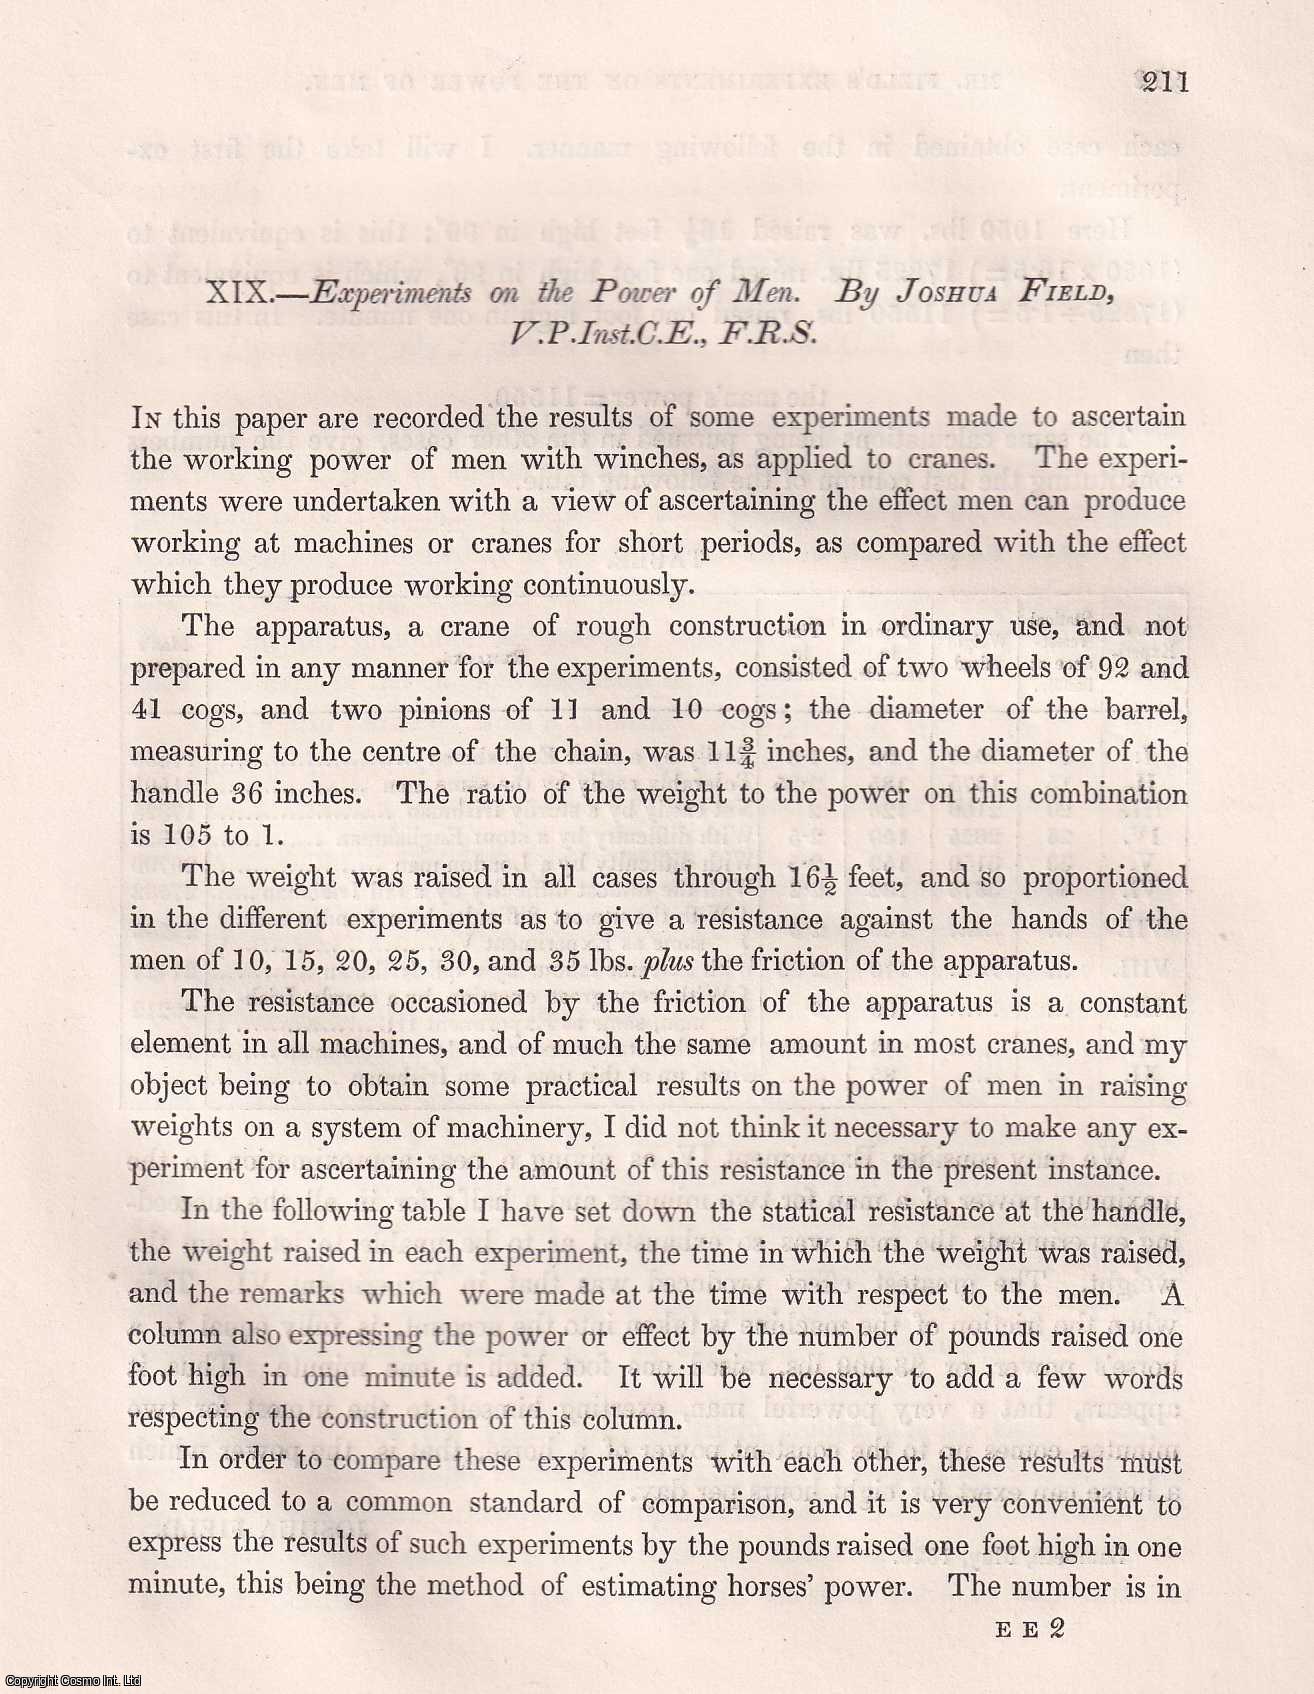 Joshua Field, V.P.Inst.C.E., F.R.S. - Experiments on The Power of Men. An article from the Institution of Civil Engineers, 1842.